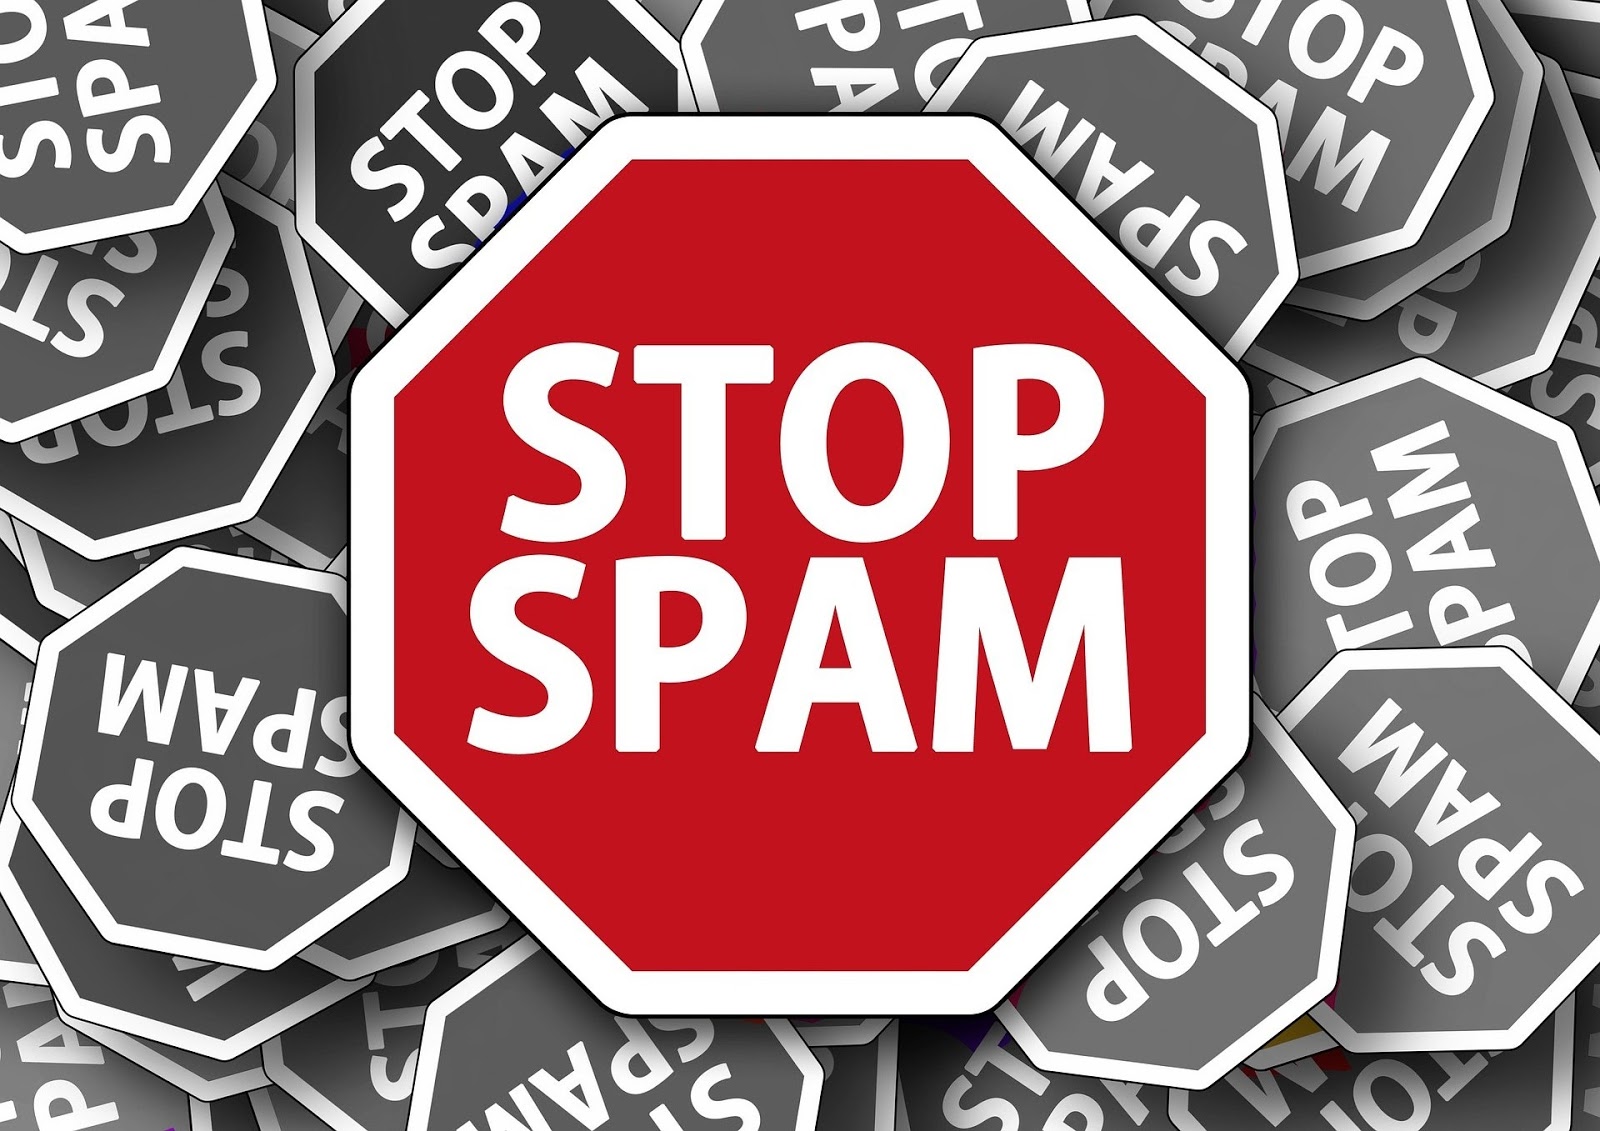 spam-is-the-dominant-method-to-spread-malware-in-2018-mobygeek